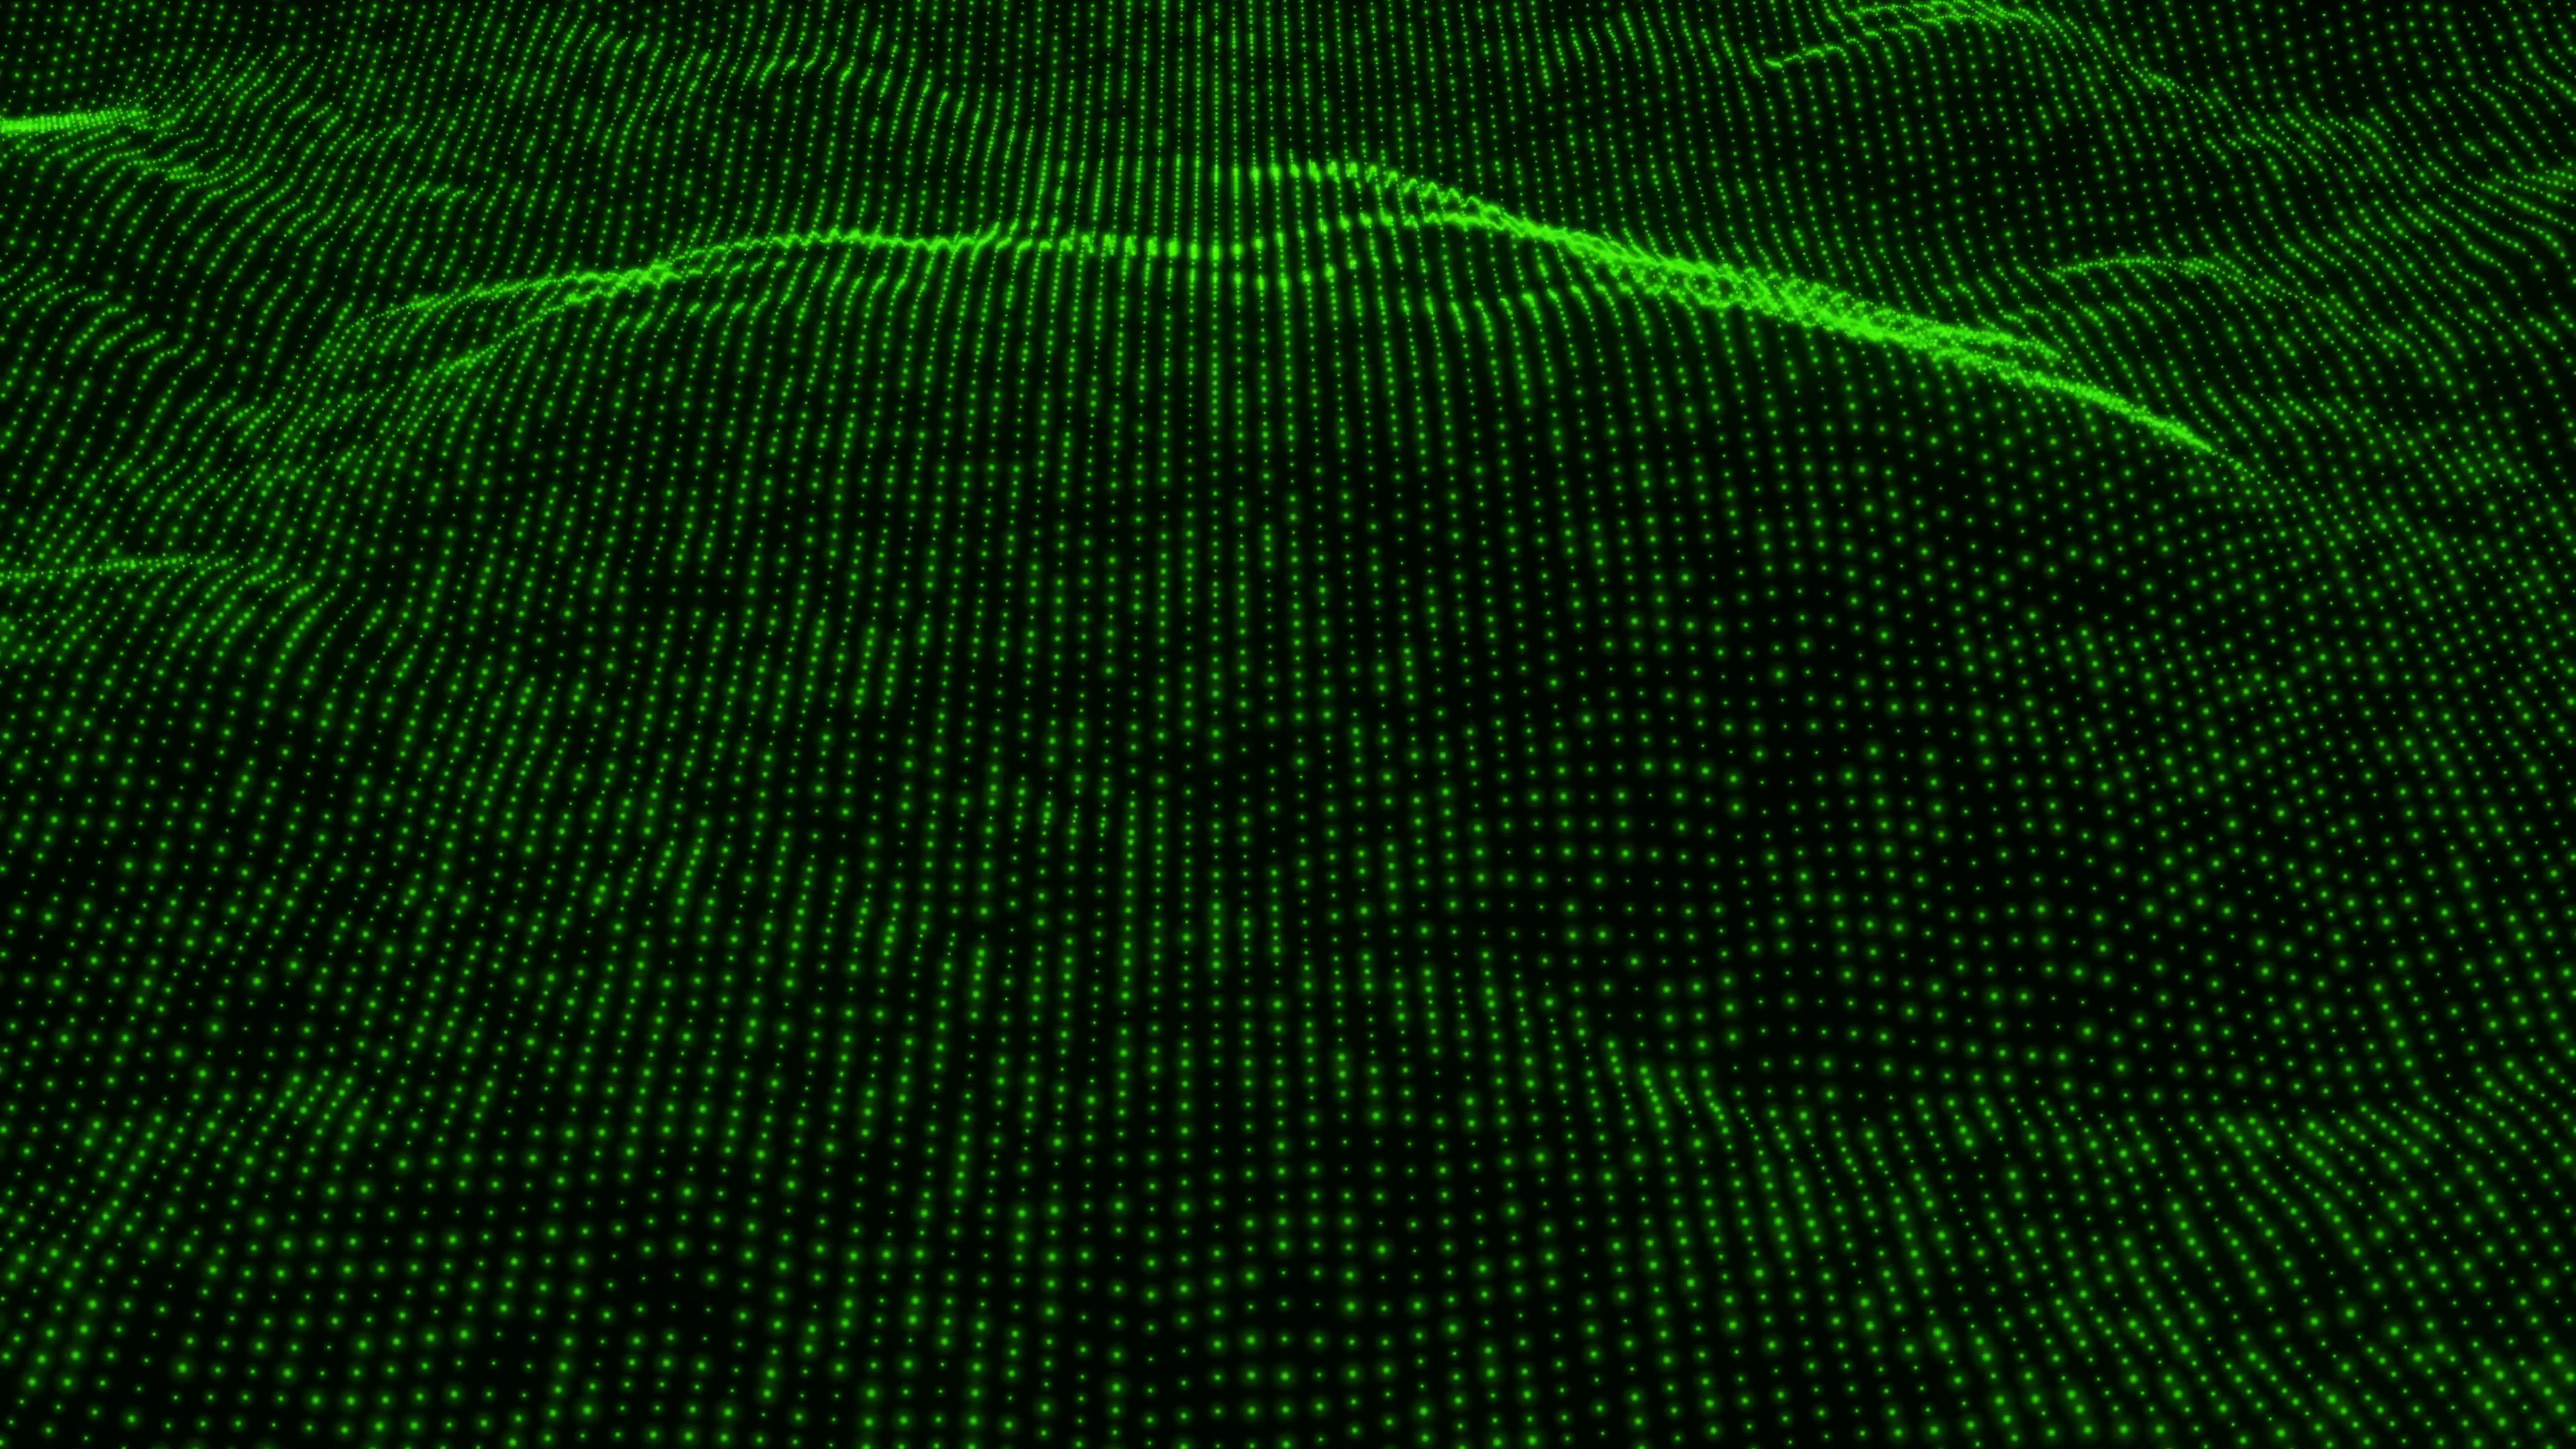 Green Digital Scanner Or Energy Waves Abstract Animation